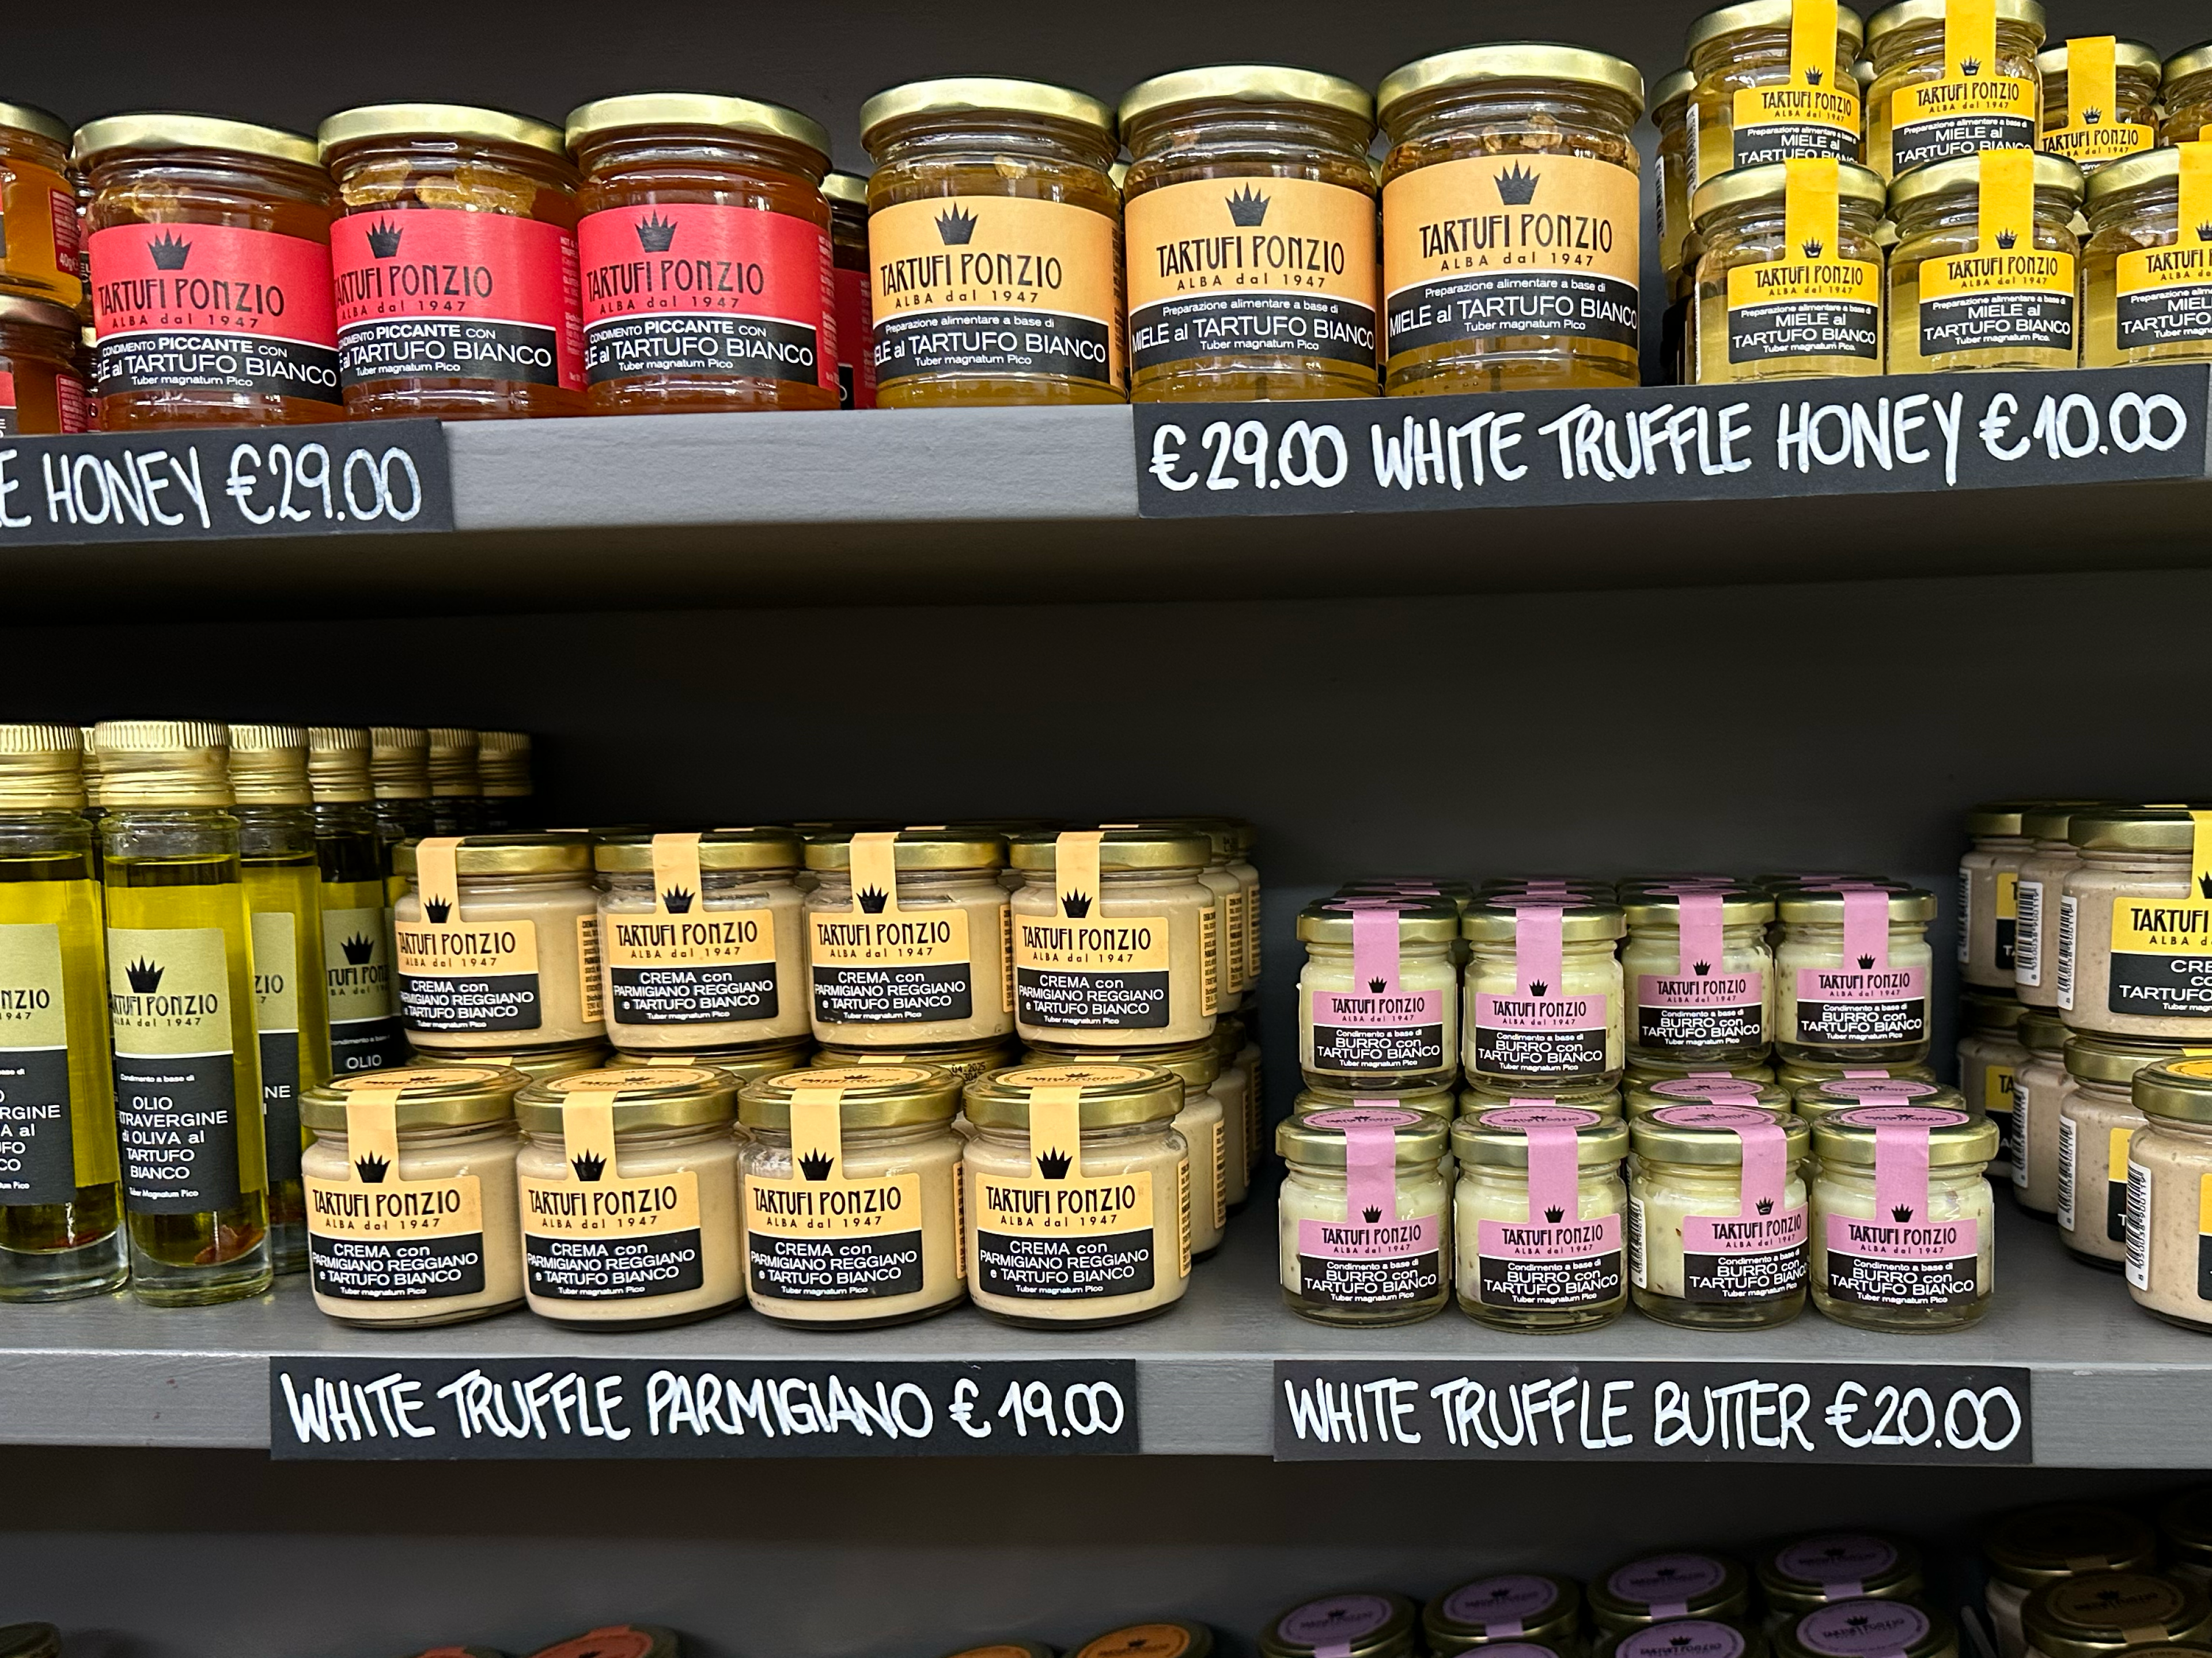 Truffle products for sale in Italy